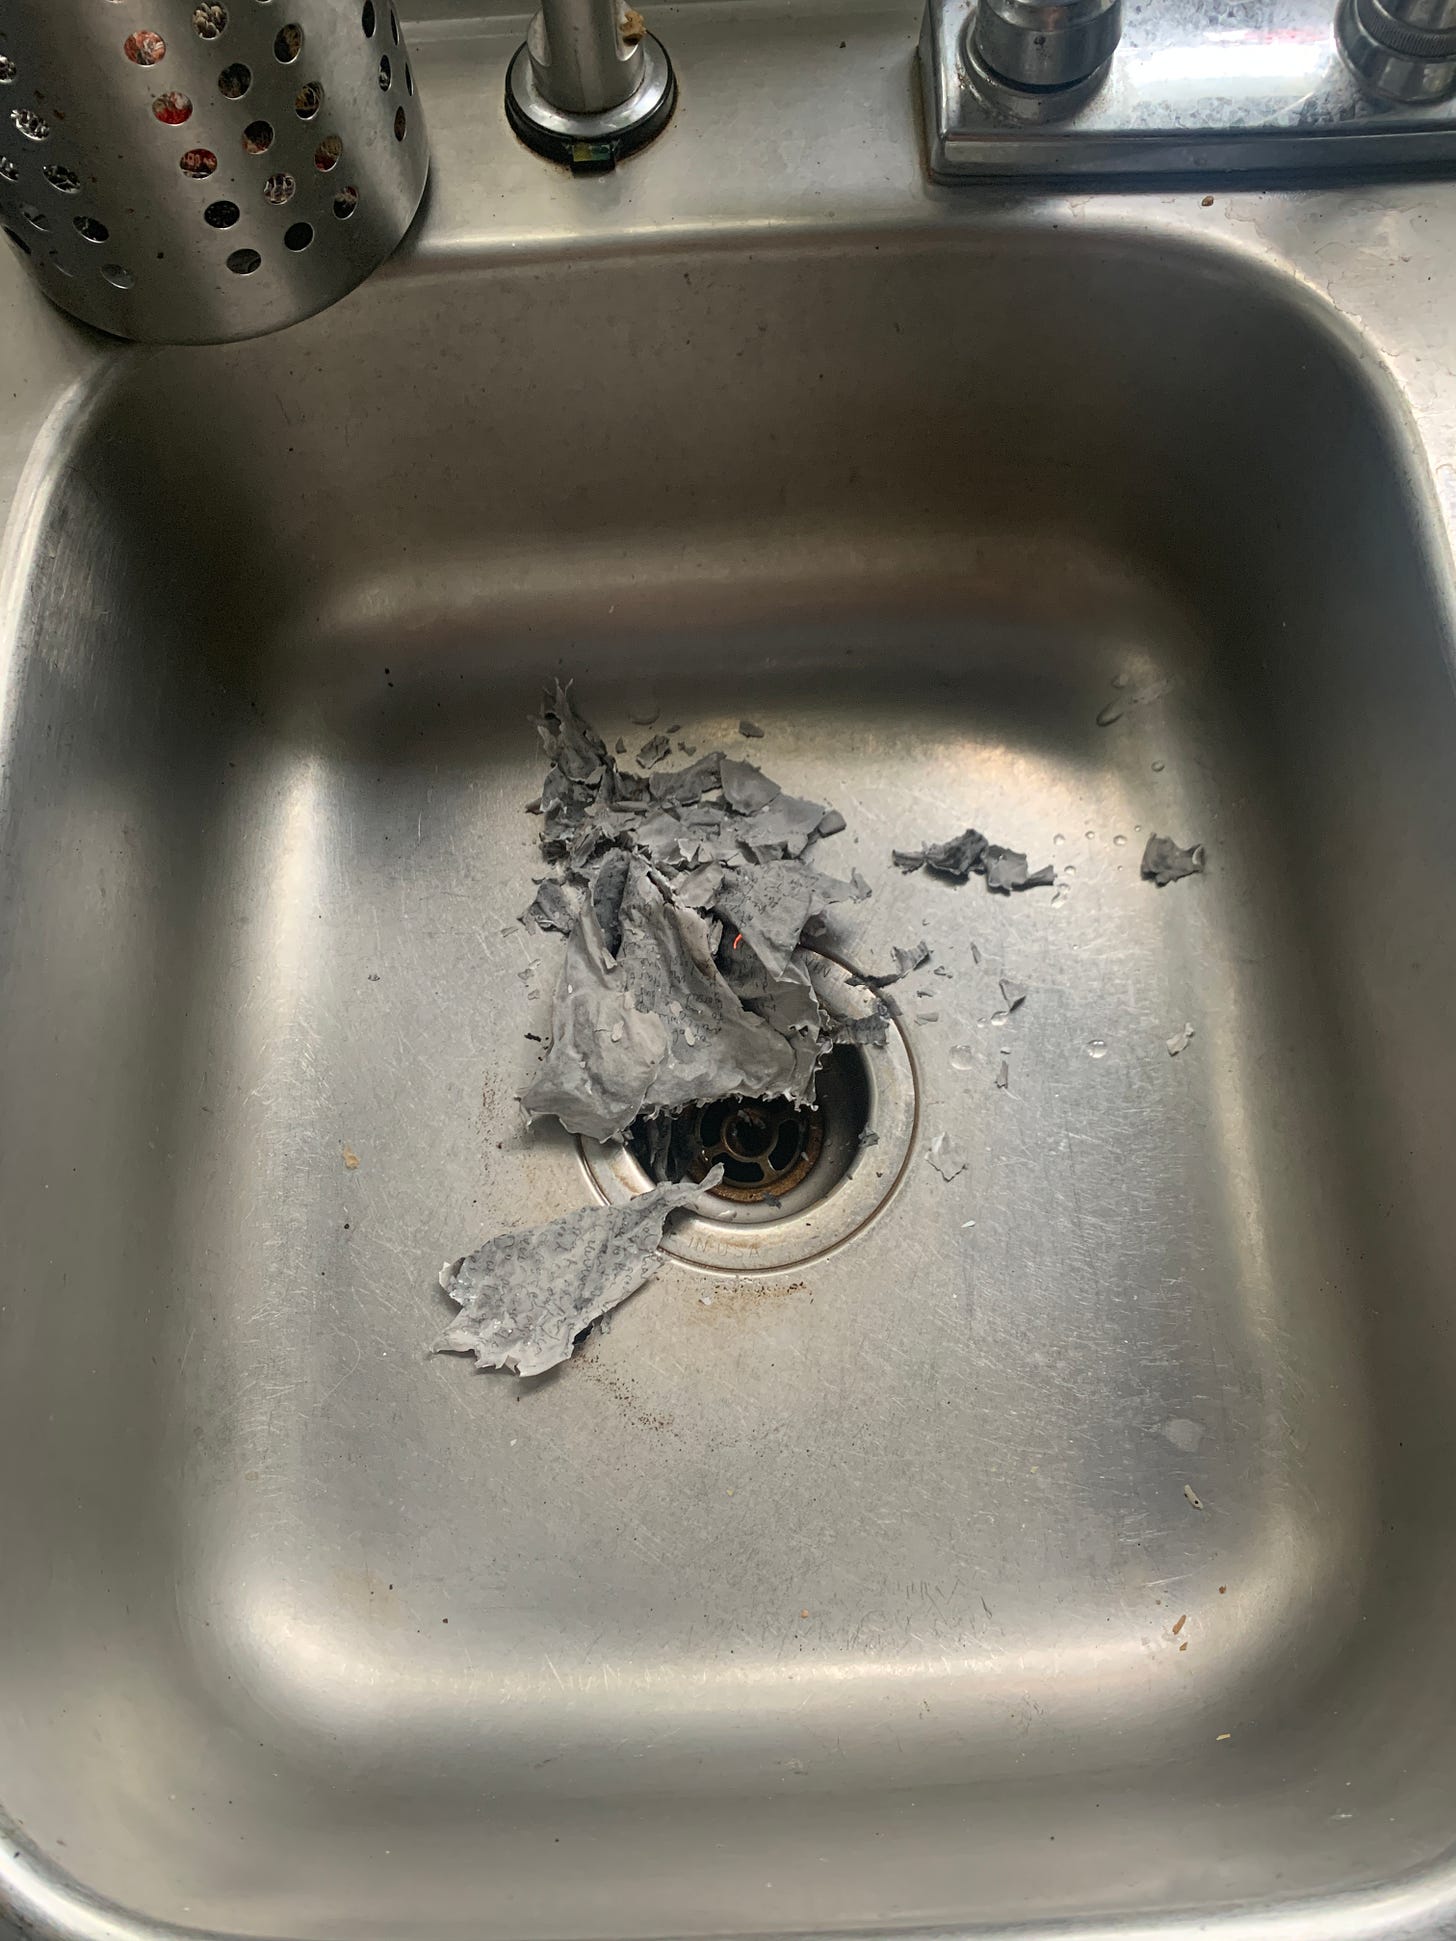 Ashes sit in the bottom of a stainless steel sink